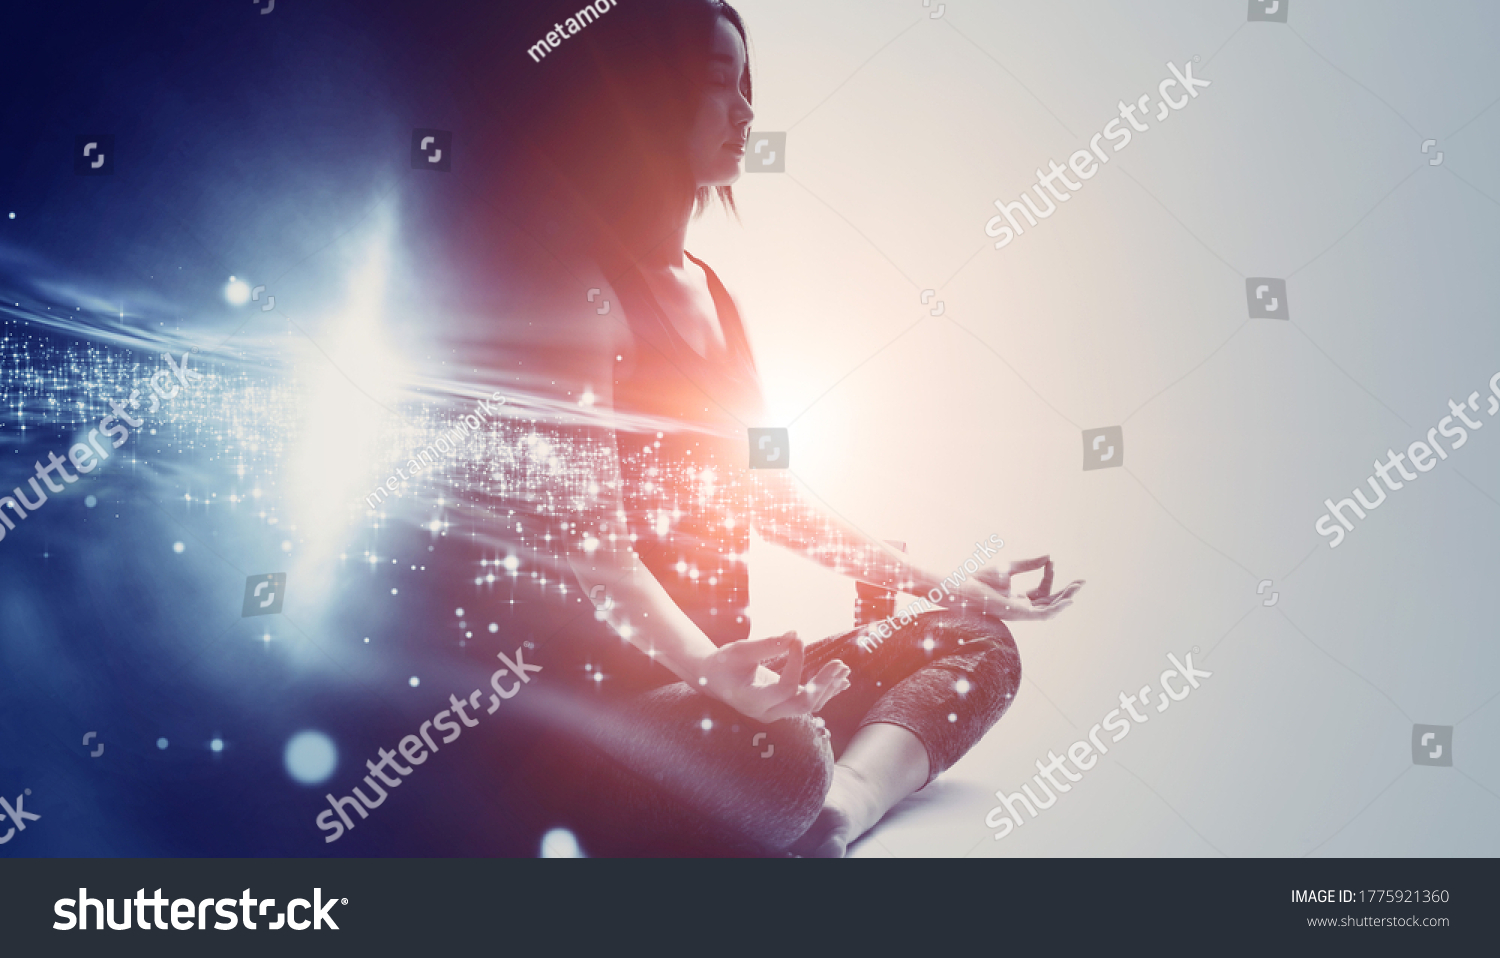 Mindfulness meditation concept. Meditating young woman. Yoga. Concentration. #1775921360